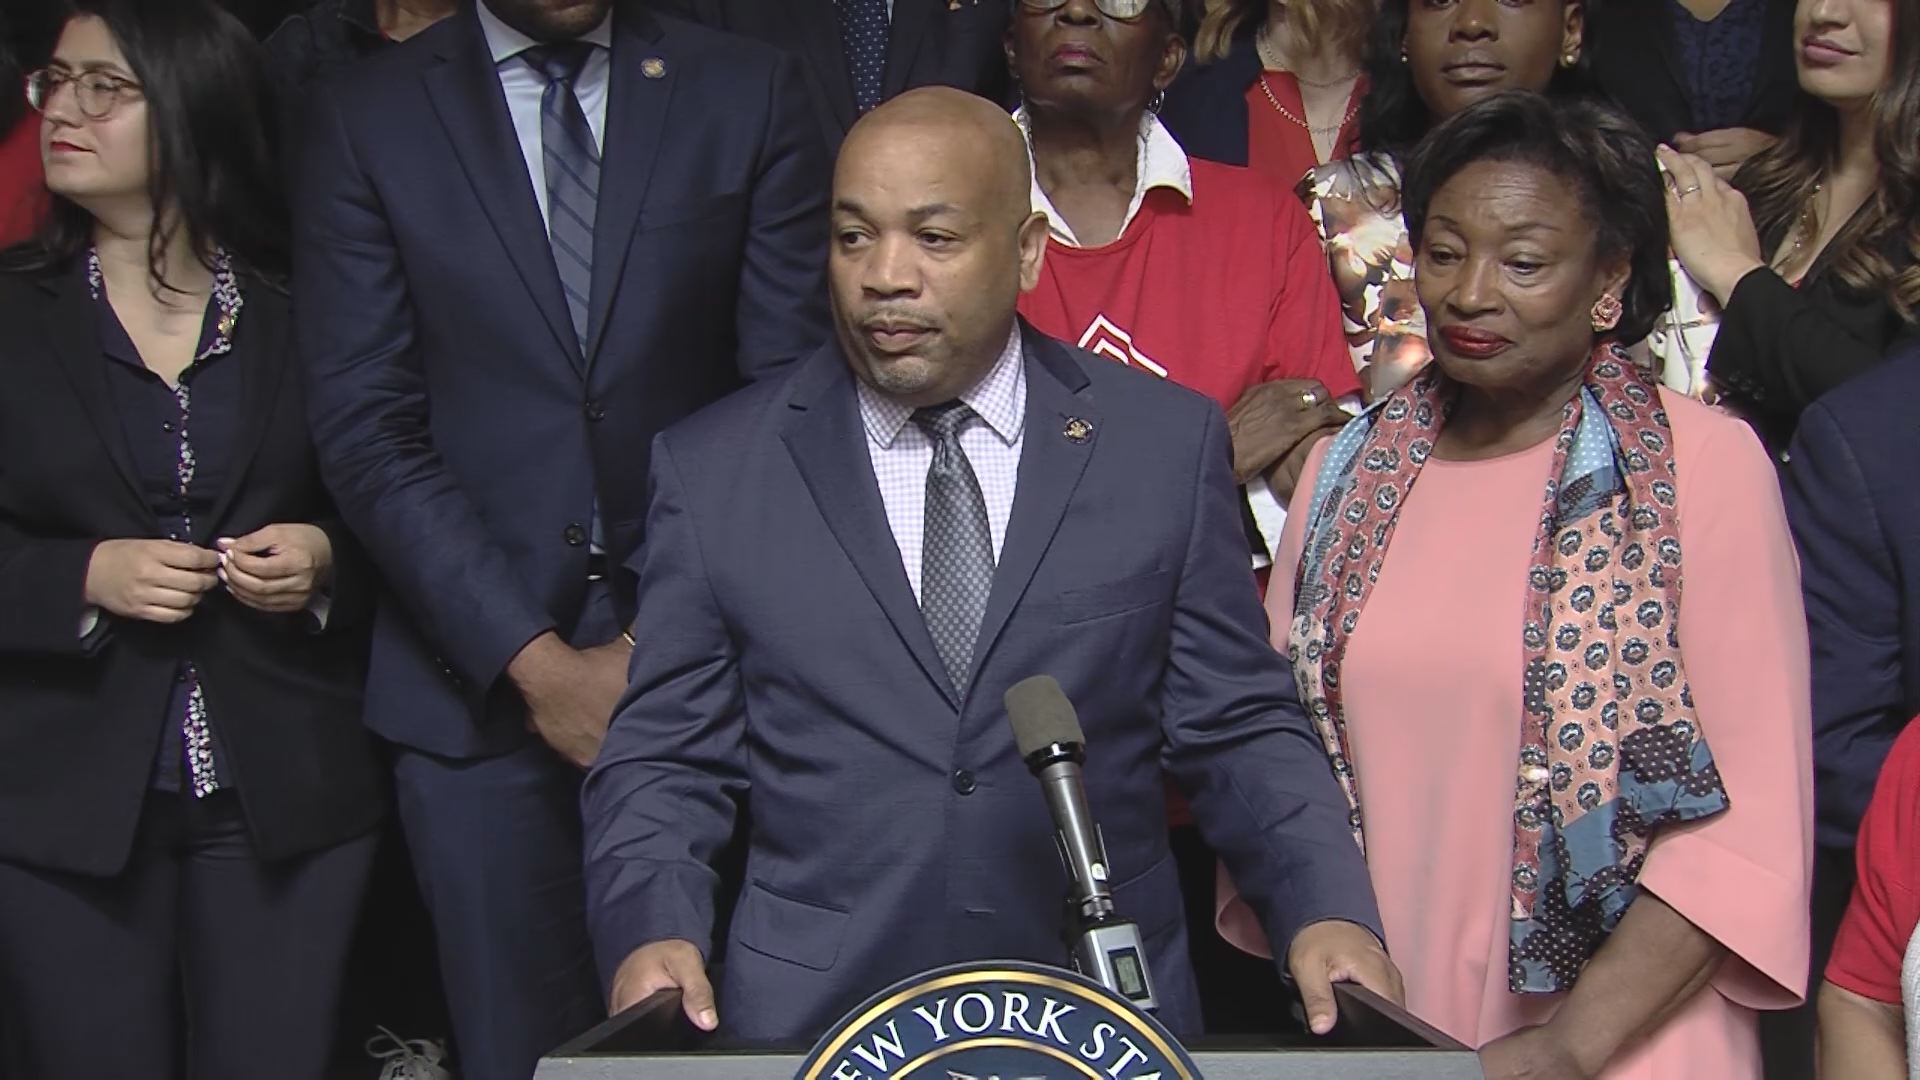 Speaker Heastie and Senate Majority Leader Andrea Stewart-Cousins hold press conference to announce historic affordable housing legislation and tenant protections